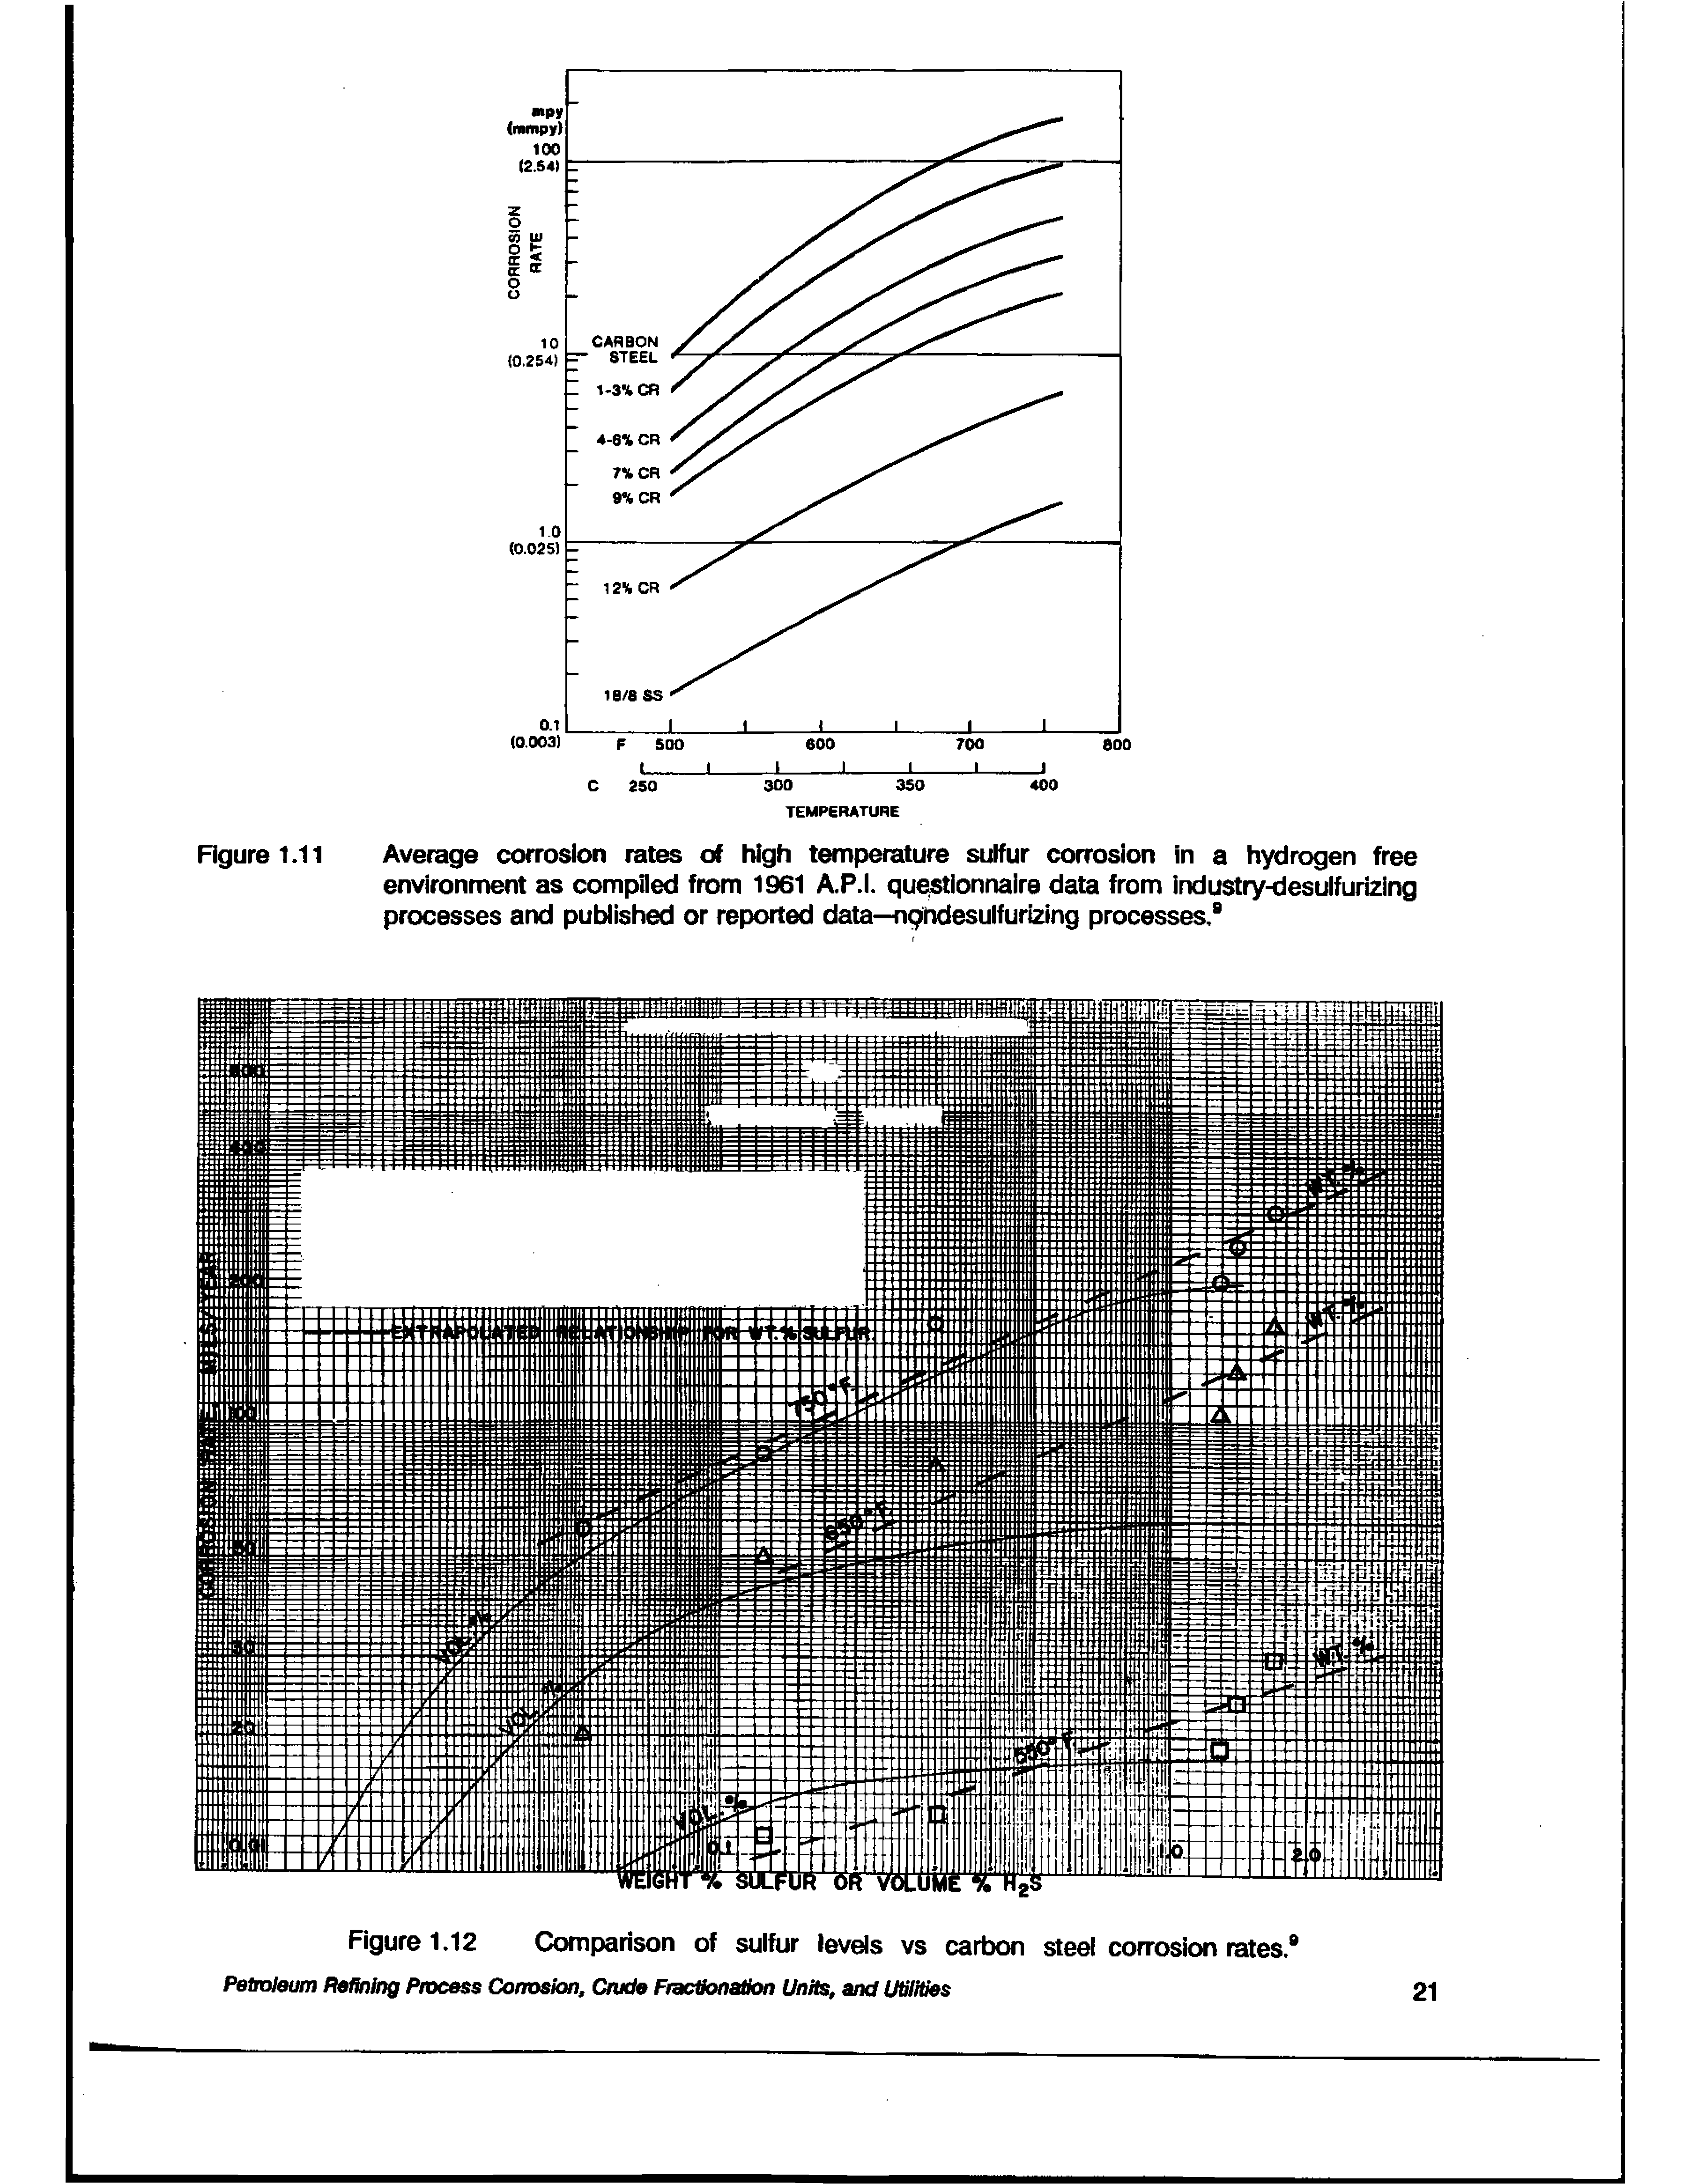 Figure 1.11 Average corrosion rates of high temperature sulfur corrosion in a hydrogen free environment as compiled from 1961 A.P.I. questionnaire data from industry-desulfurizing processes and published or reported data—npndesulfurizing processes,9...